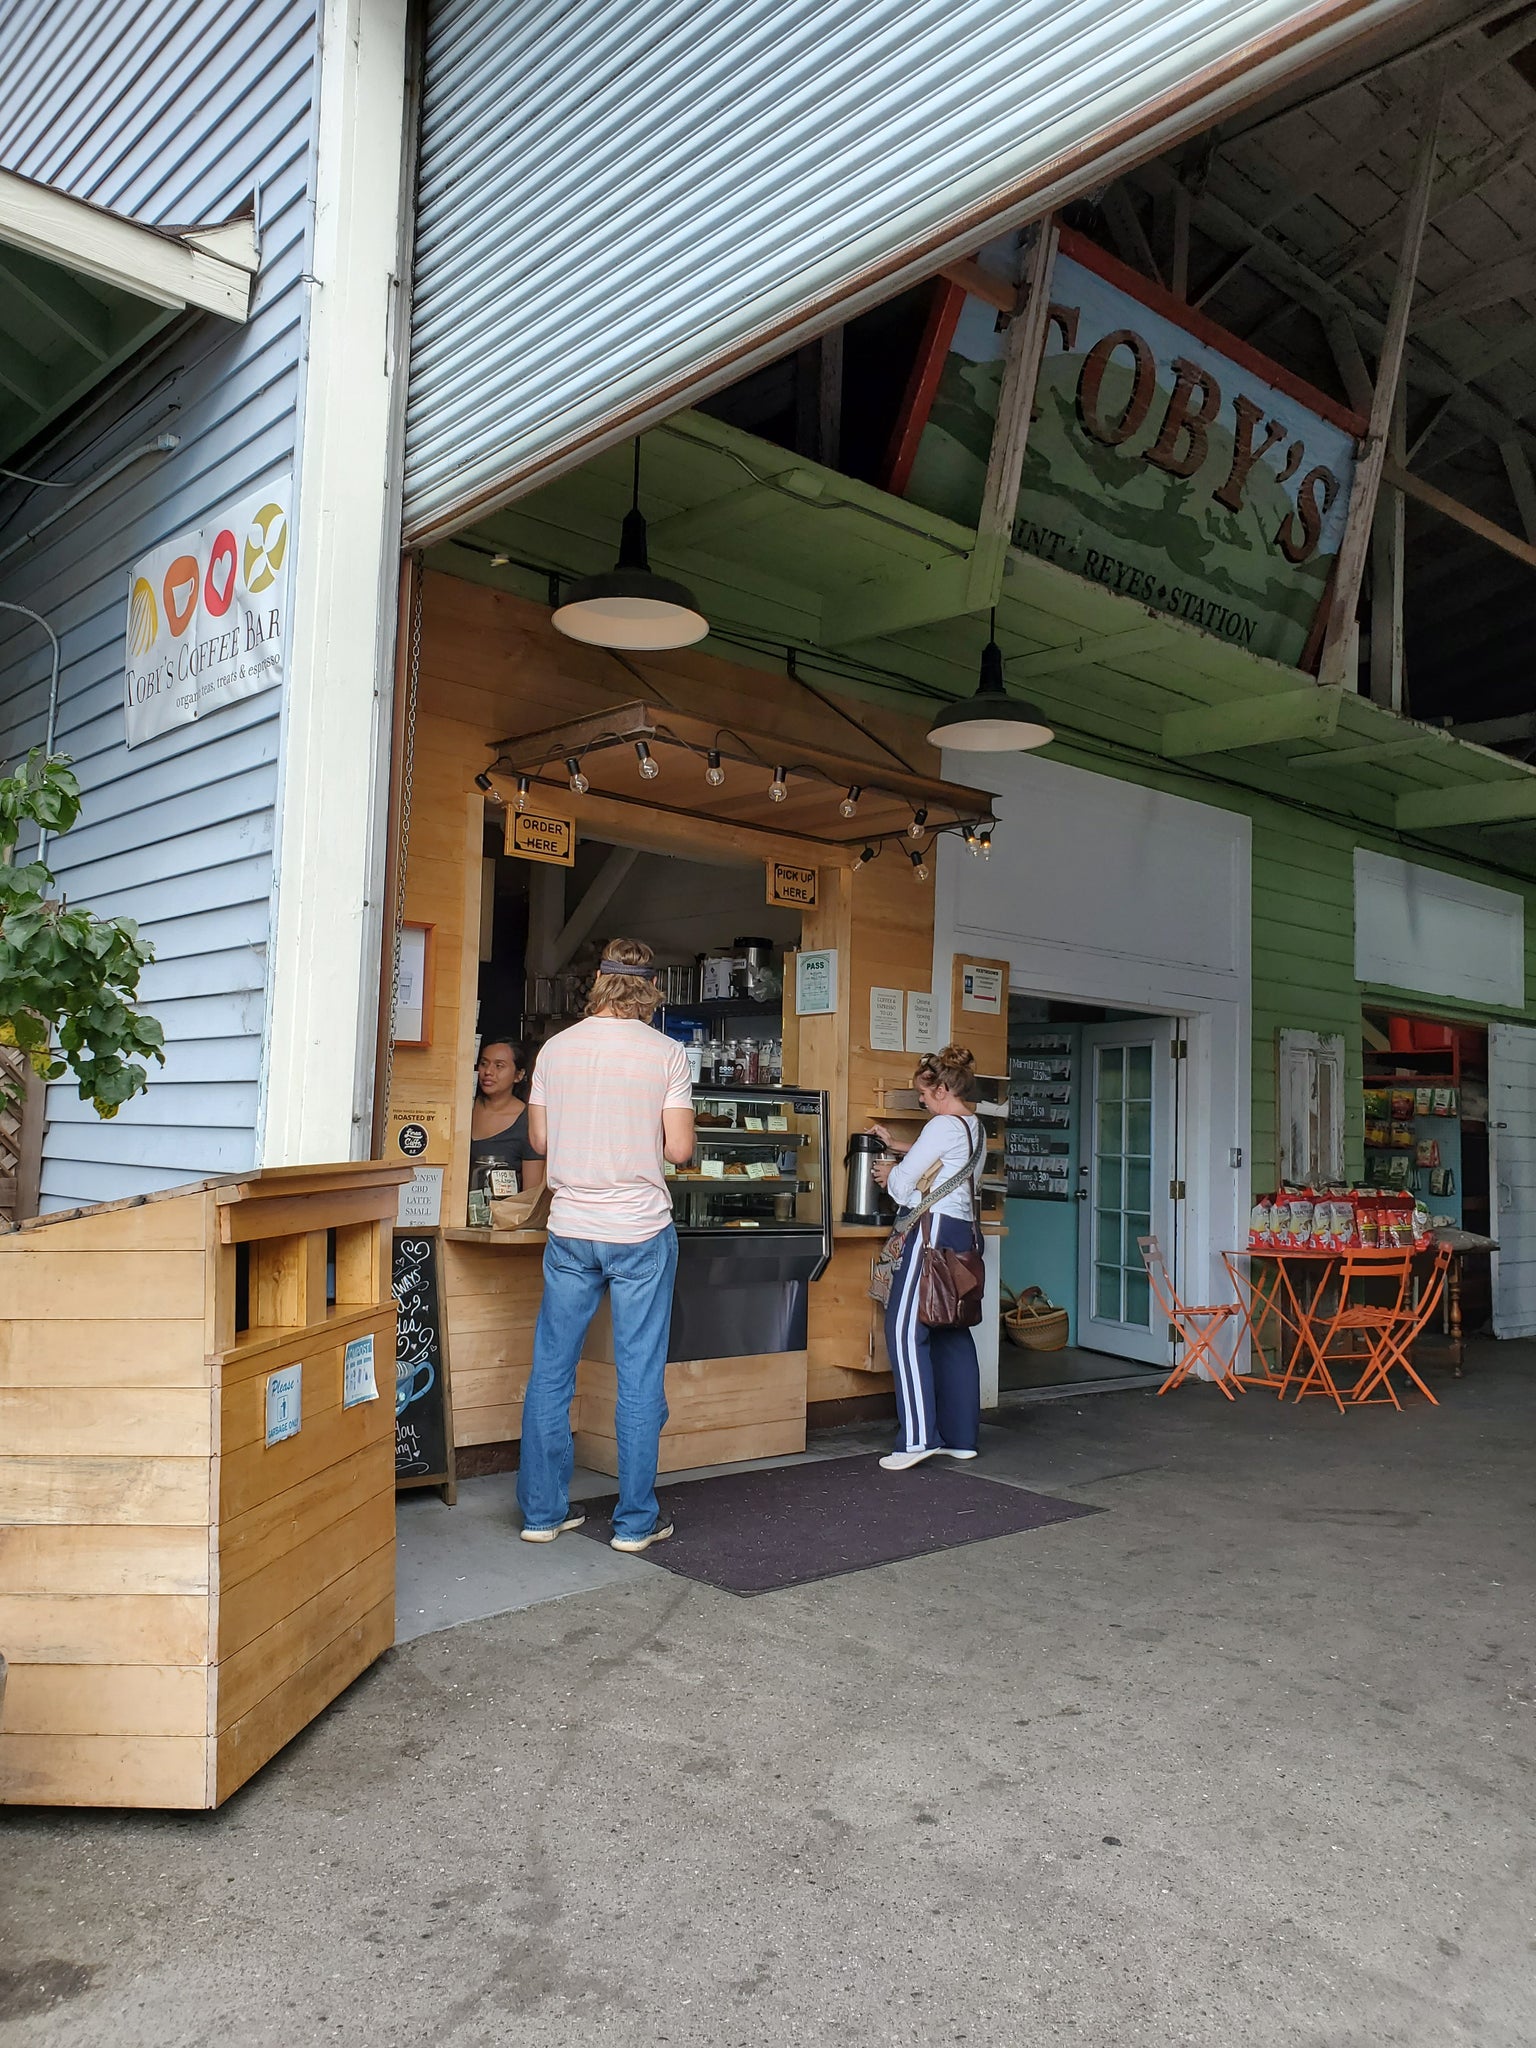 Customers ordering at Toby's Coffee Bar